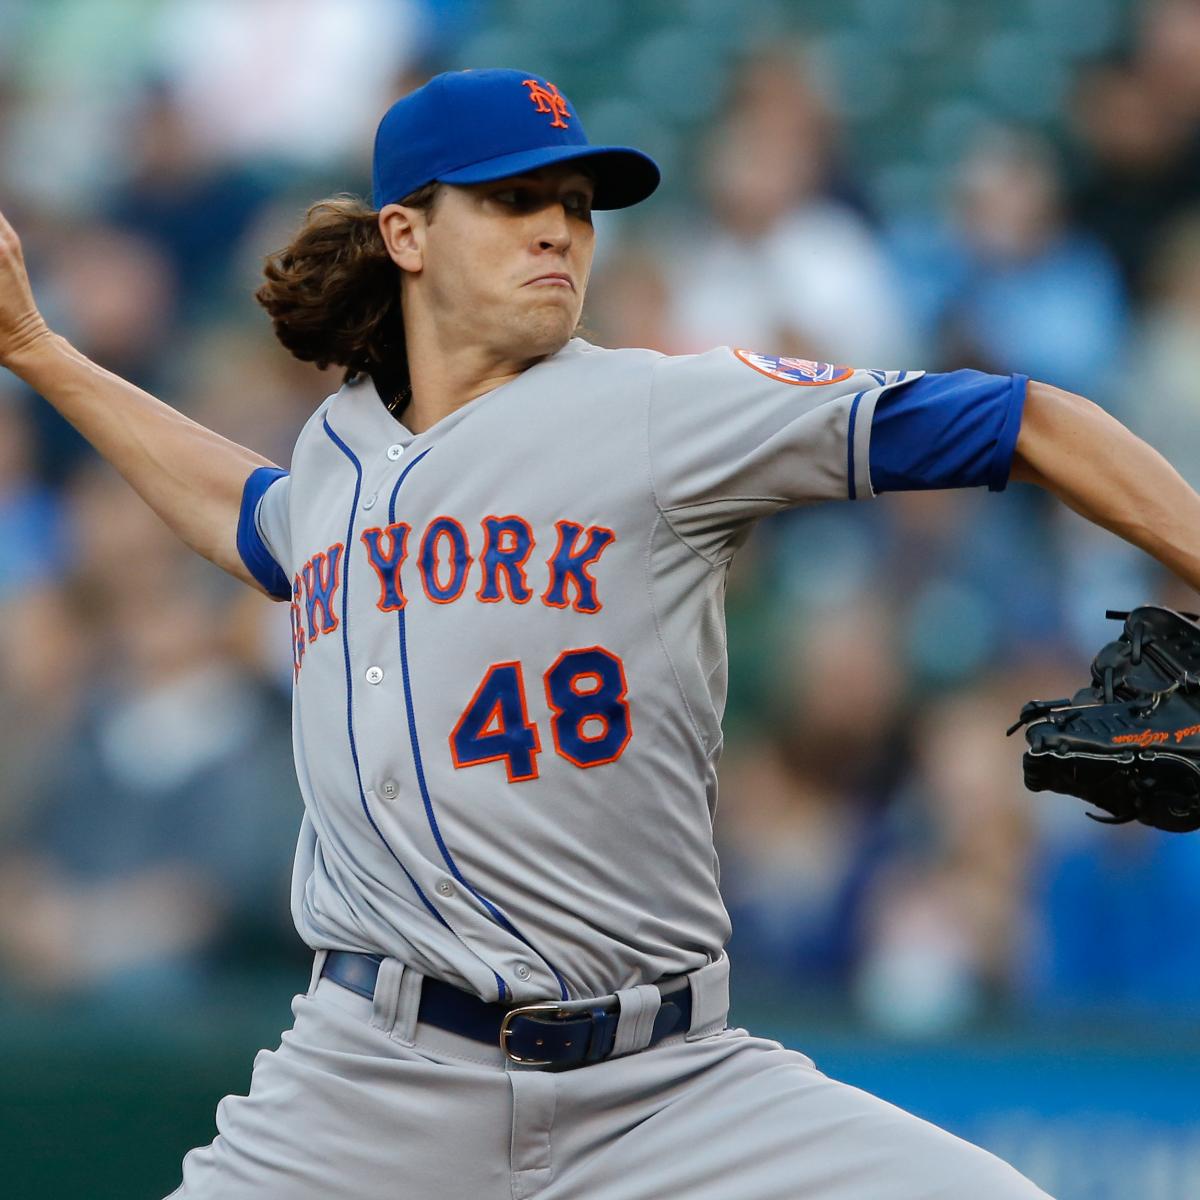 Mets pitcher Jacob deGrom wins National League Rookie of the Year